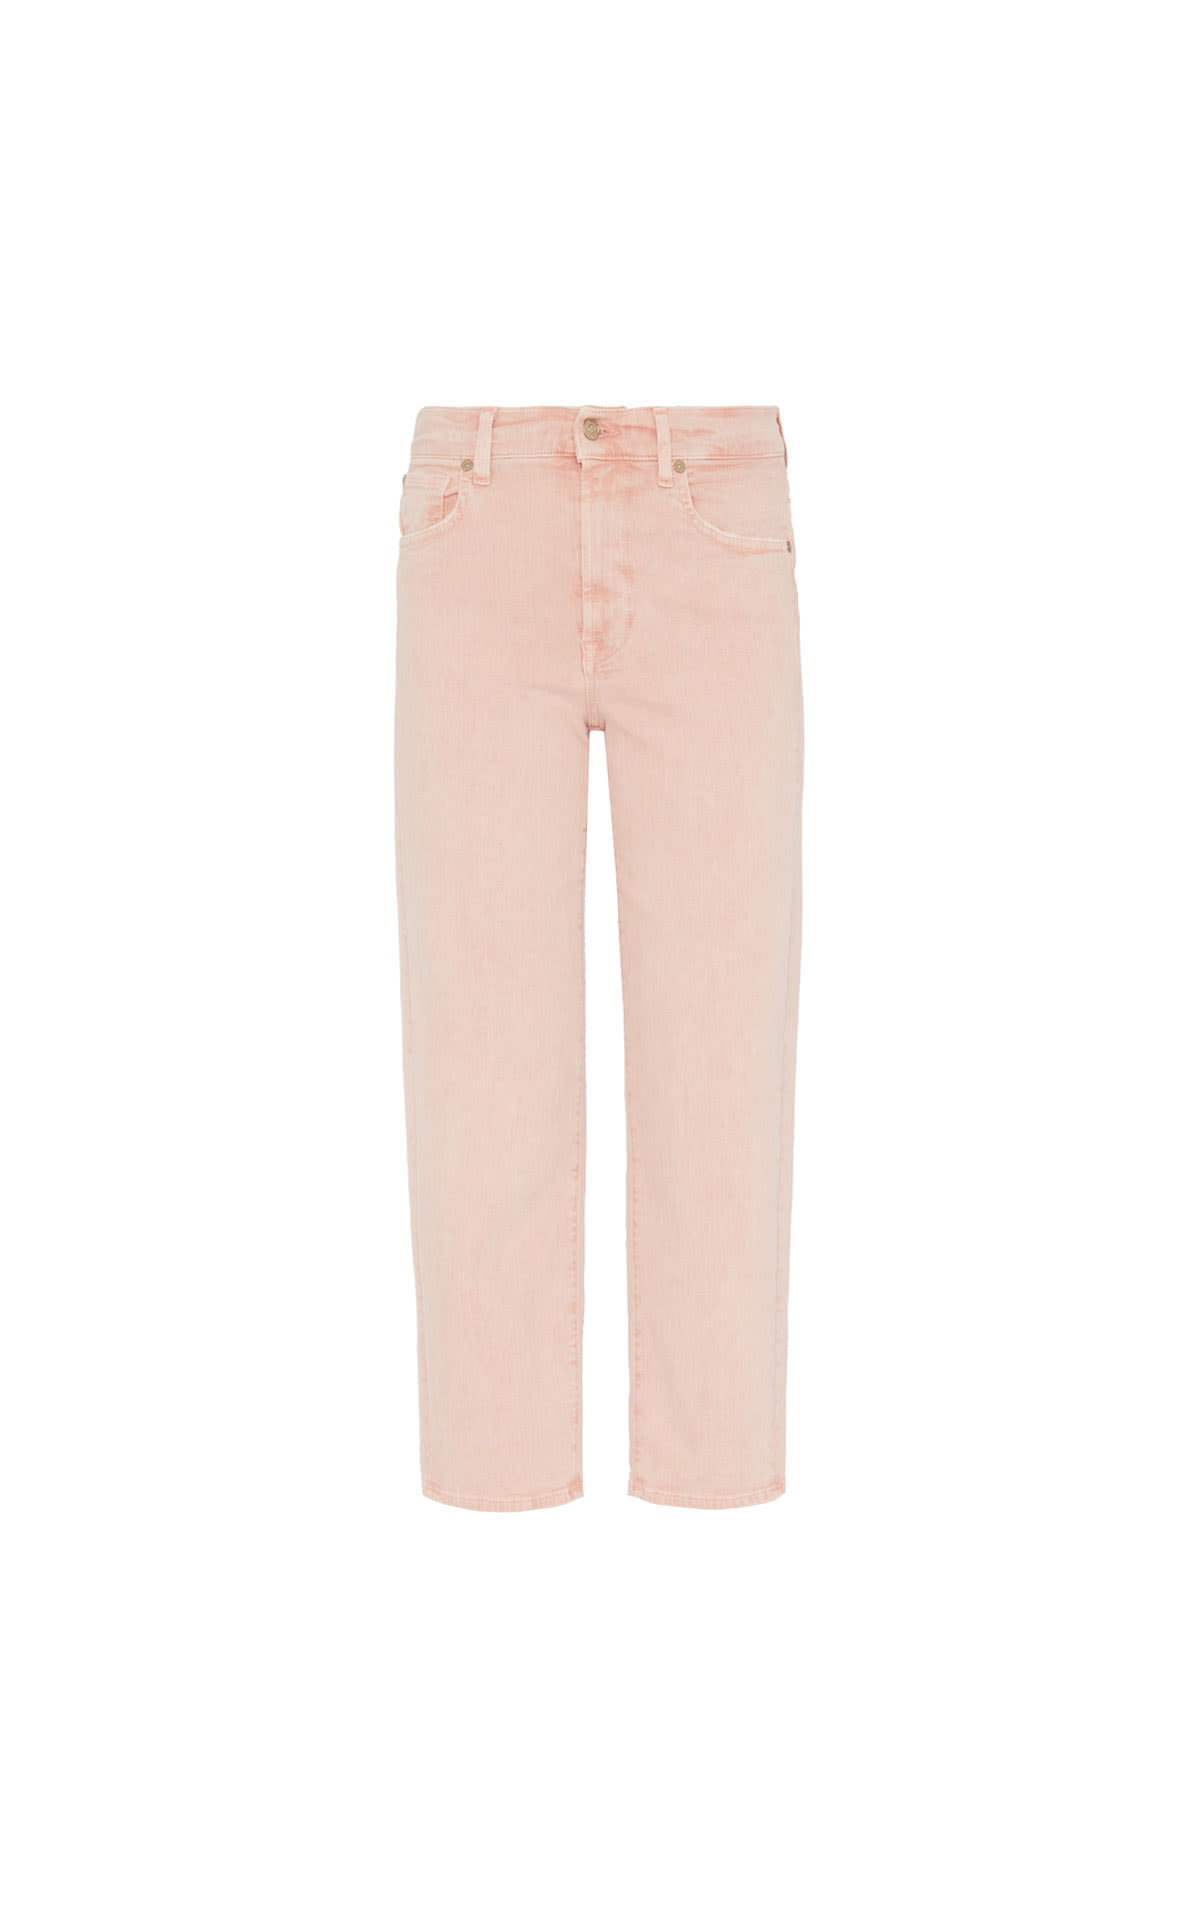 7 For all Mankind The modern straight natdye from Bicester Village